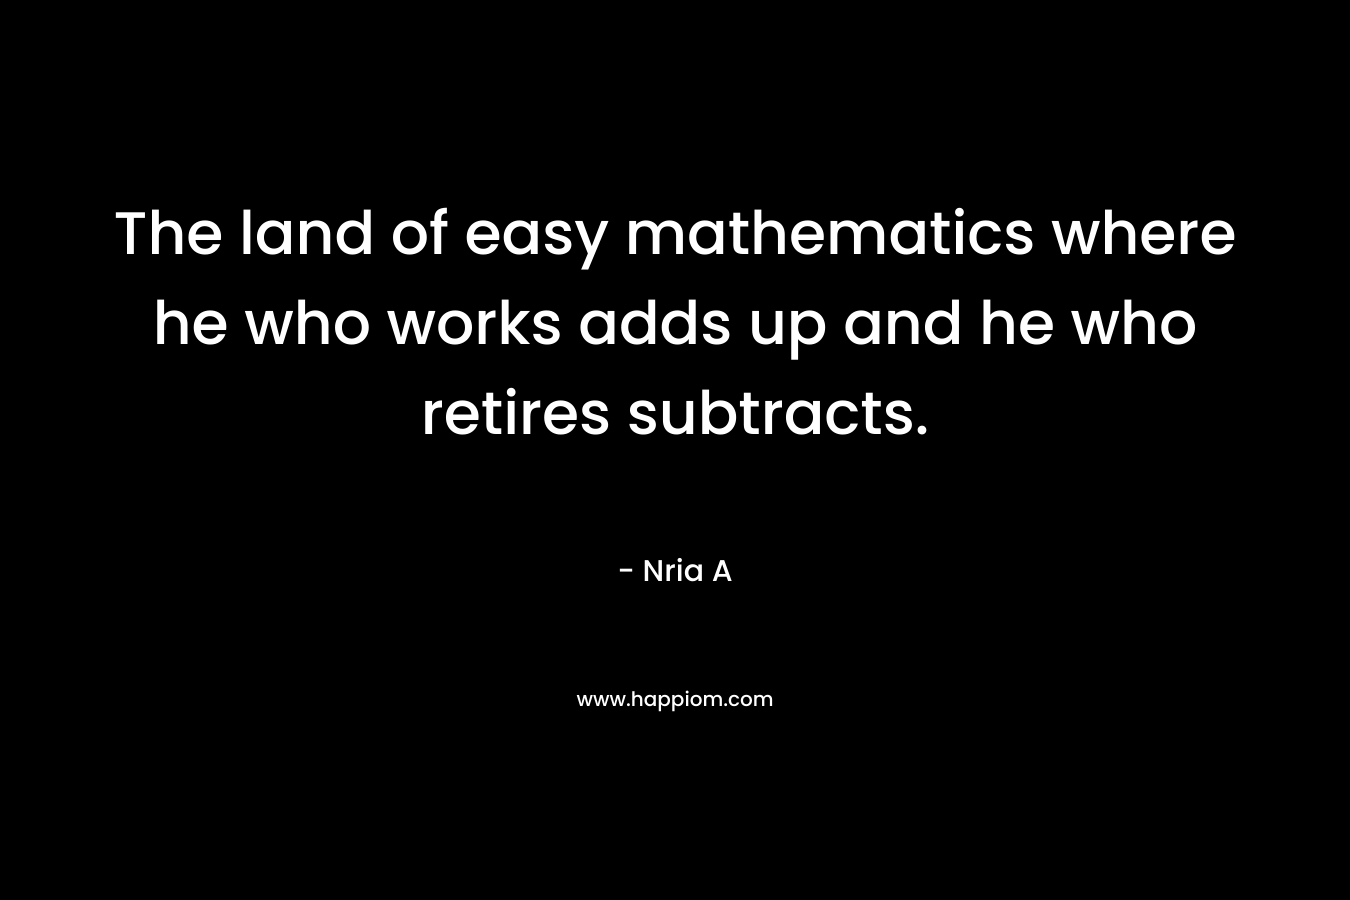 The land of easy mathematics where he who works adds up and he who retires subtracts. – Nria A